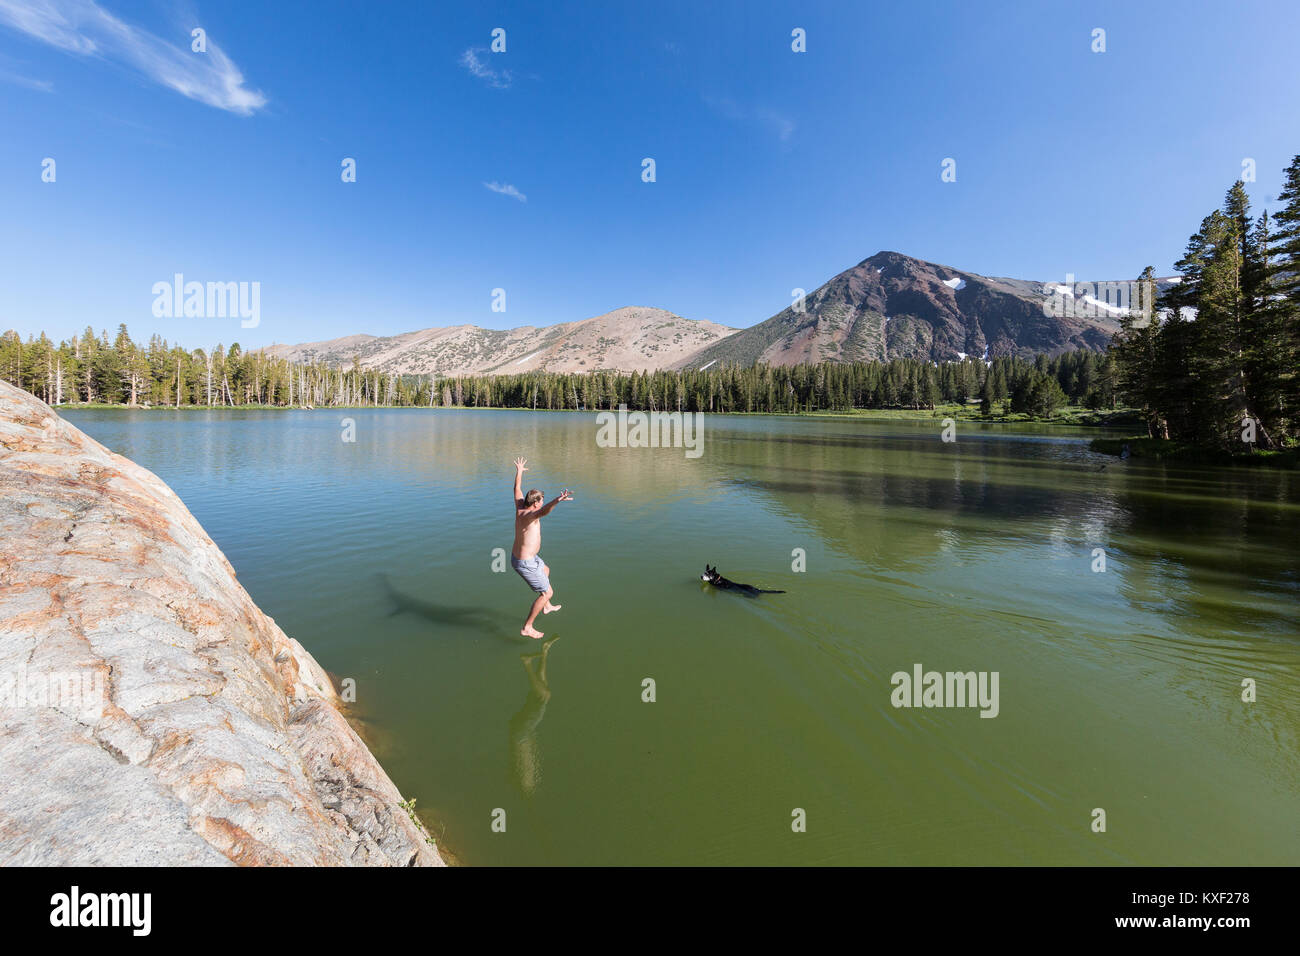 A man leaps into Trumbull Lake to join his swimming dog in California's Sierra Nevada Mountains. Stock Photo